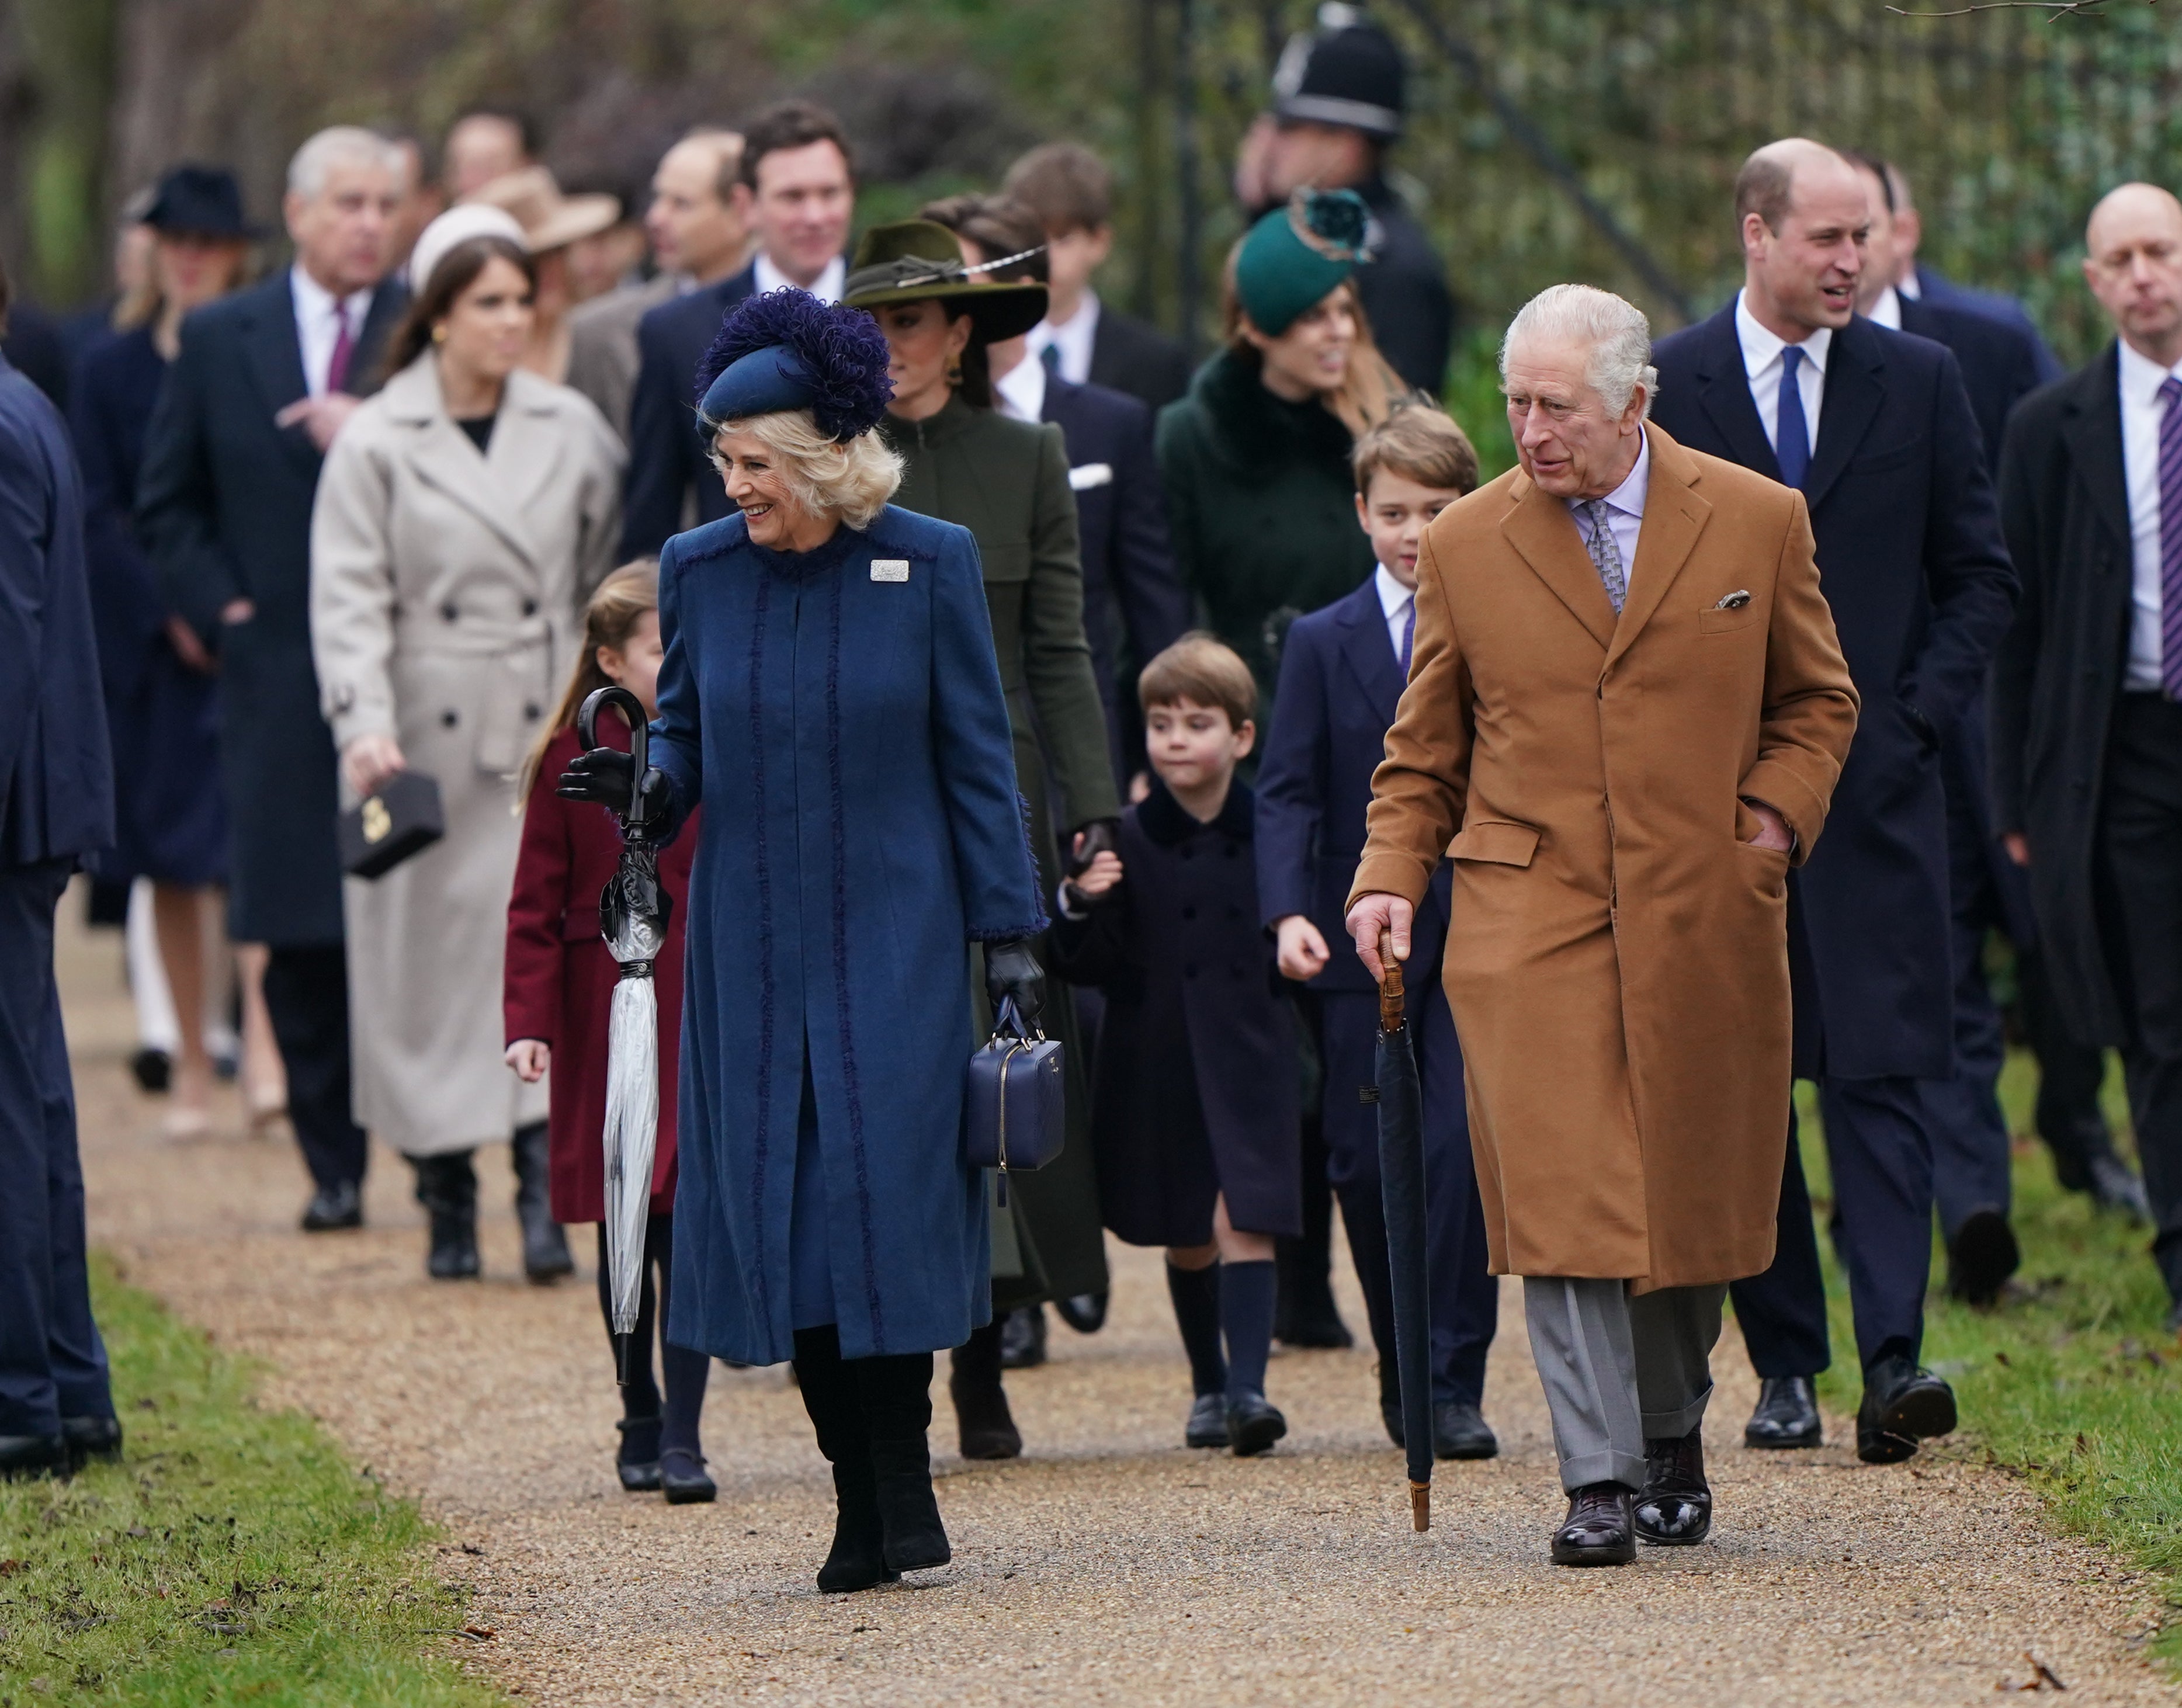 The royal family arriving at the Church of St Mary Magdalene in Sandringham last Christmas